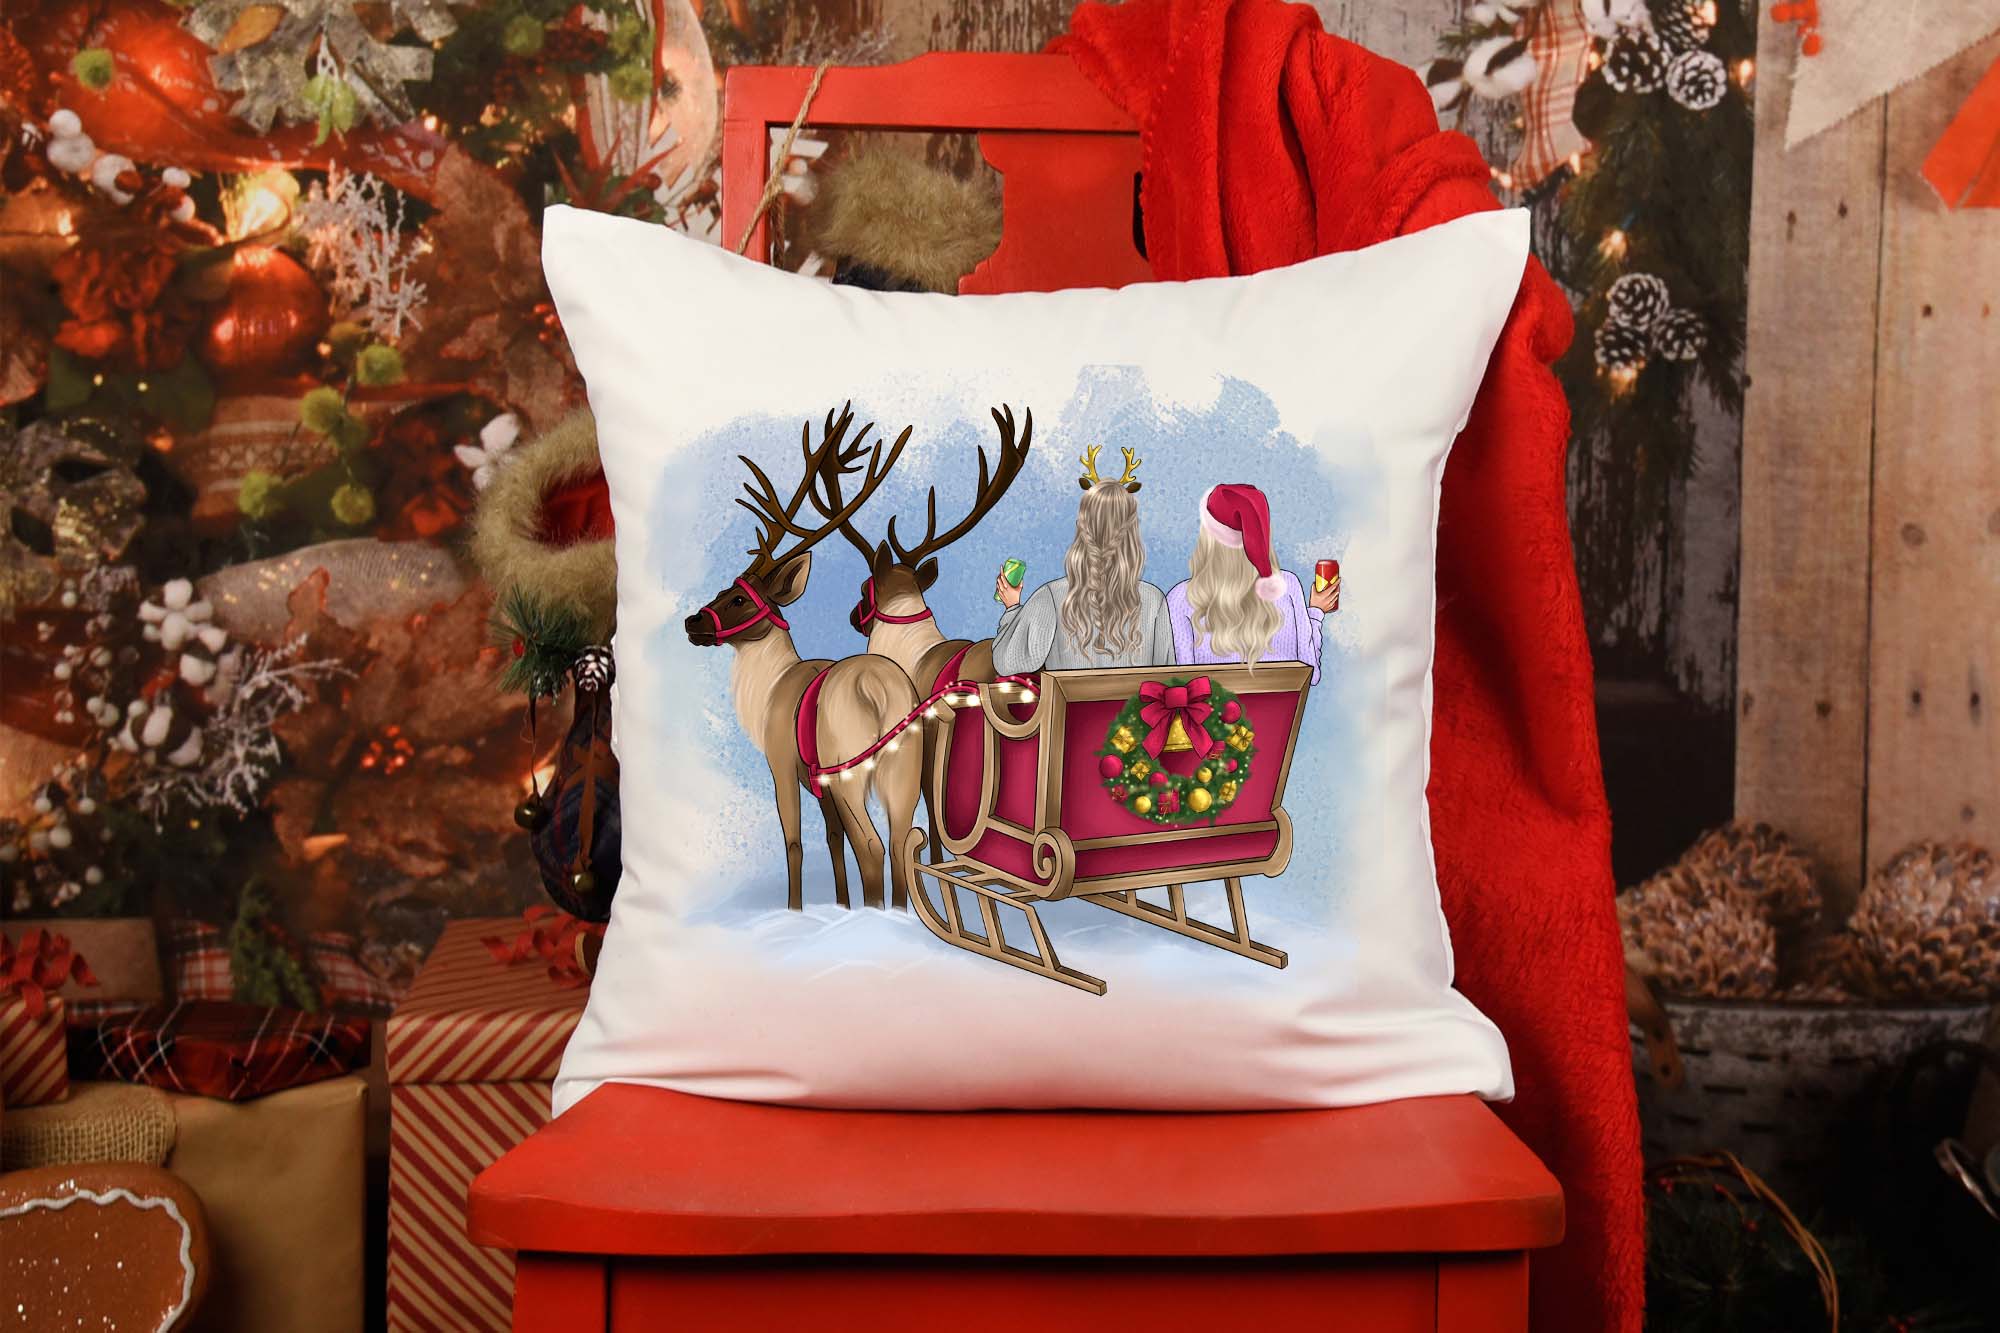 Friends in a Sleigh with Reindeer pillow mockup.